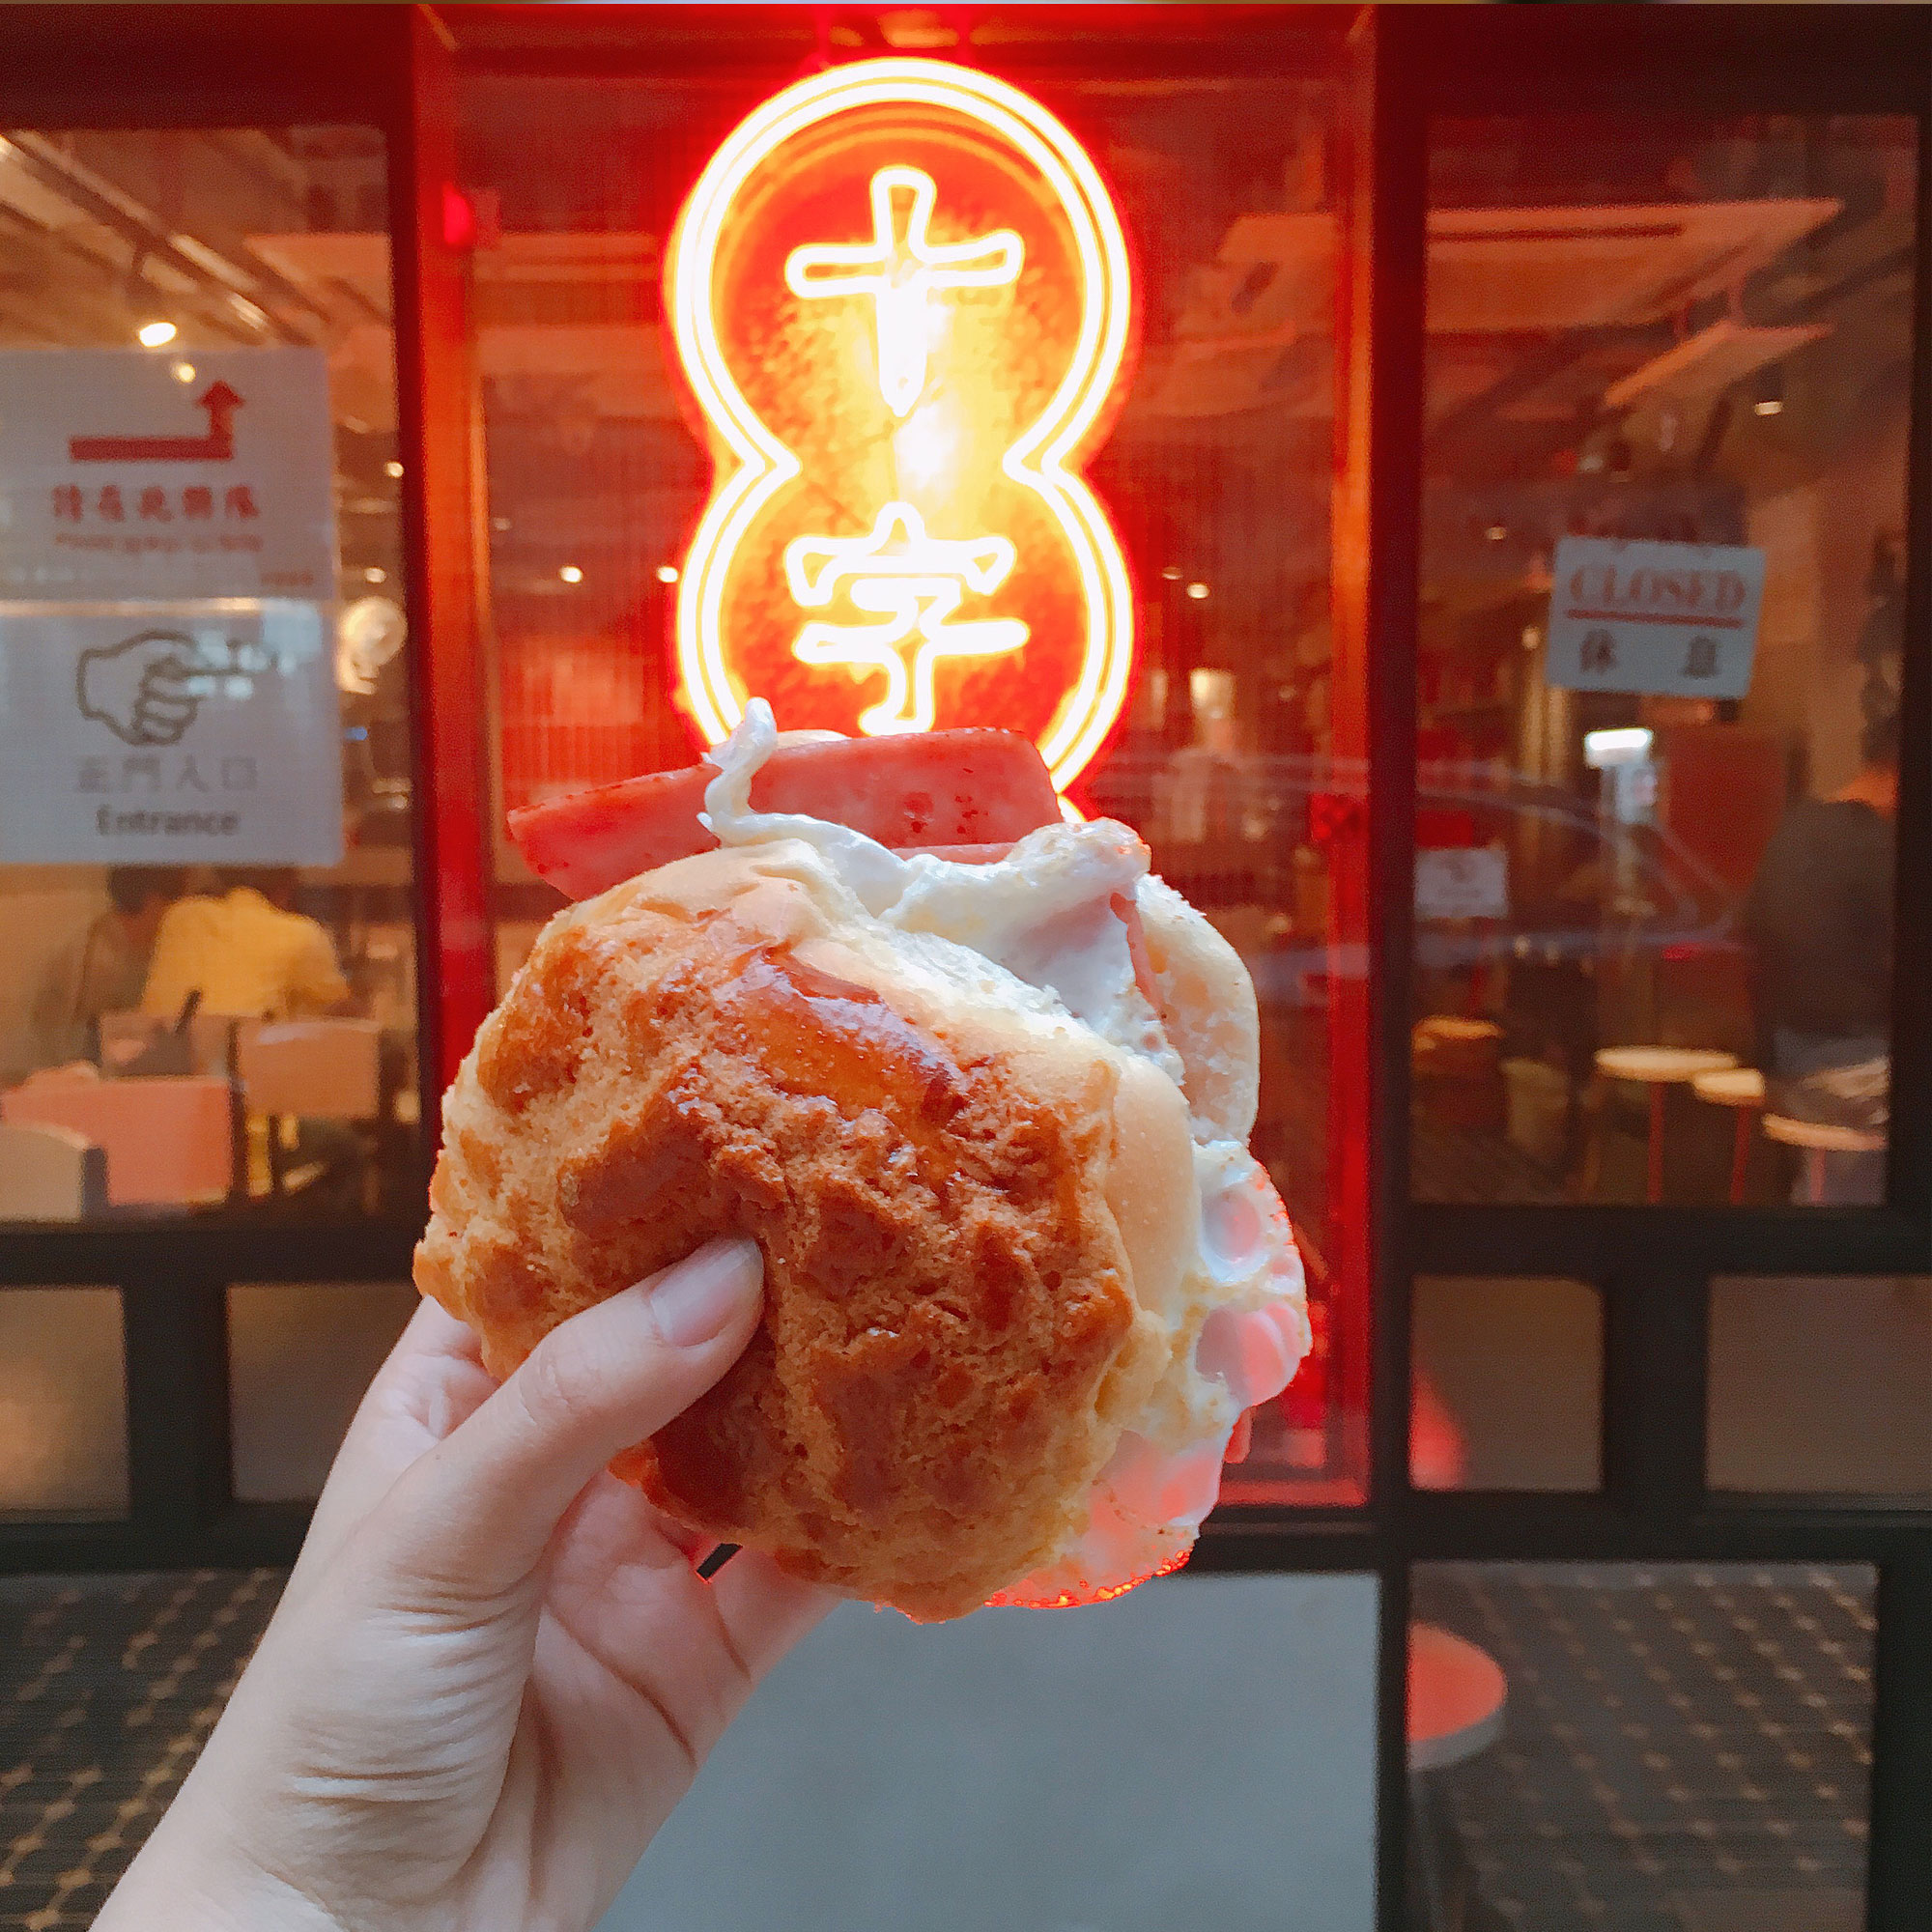 Student holding a Ham and Egg Pineapple Bun with a neon sign in the background.